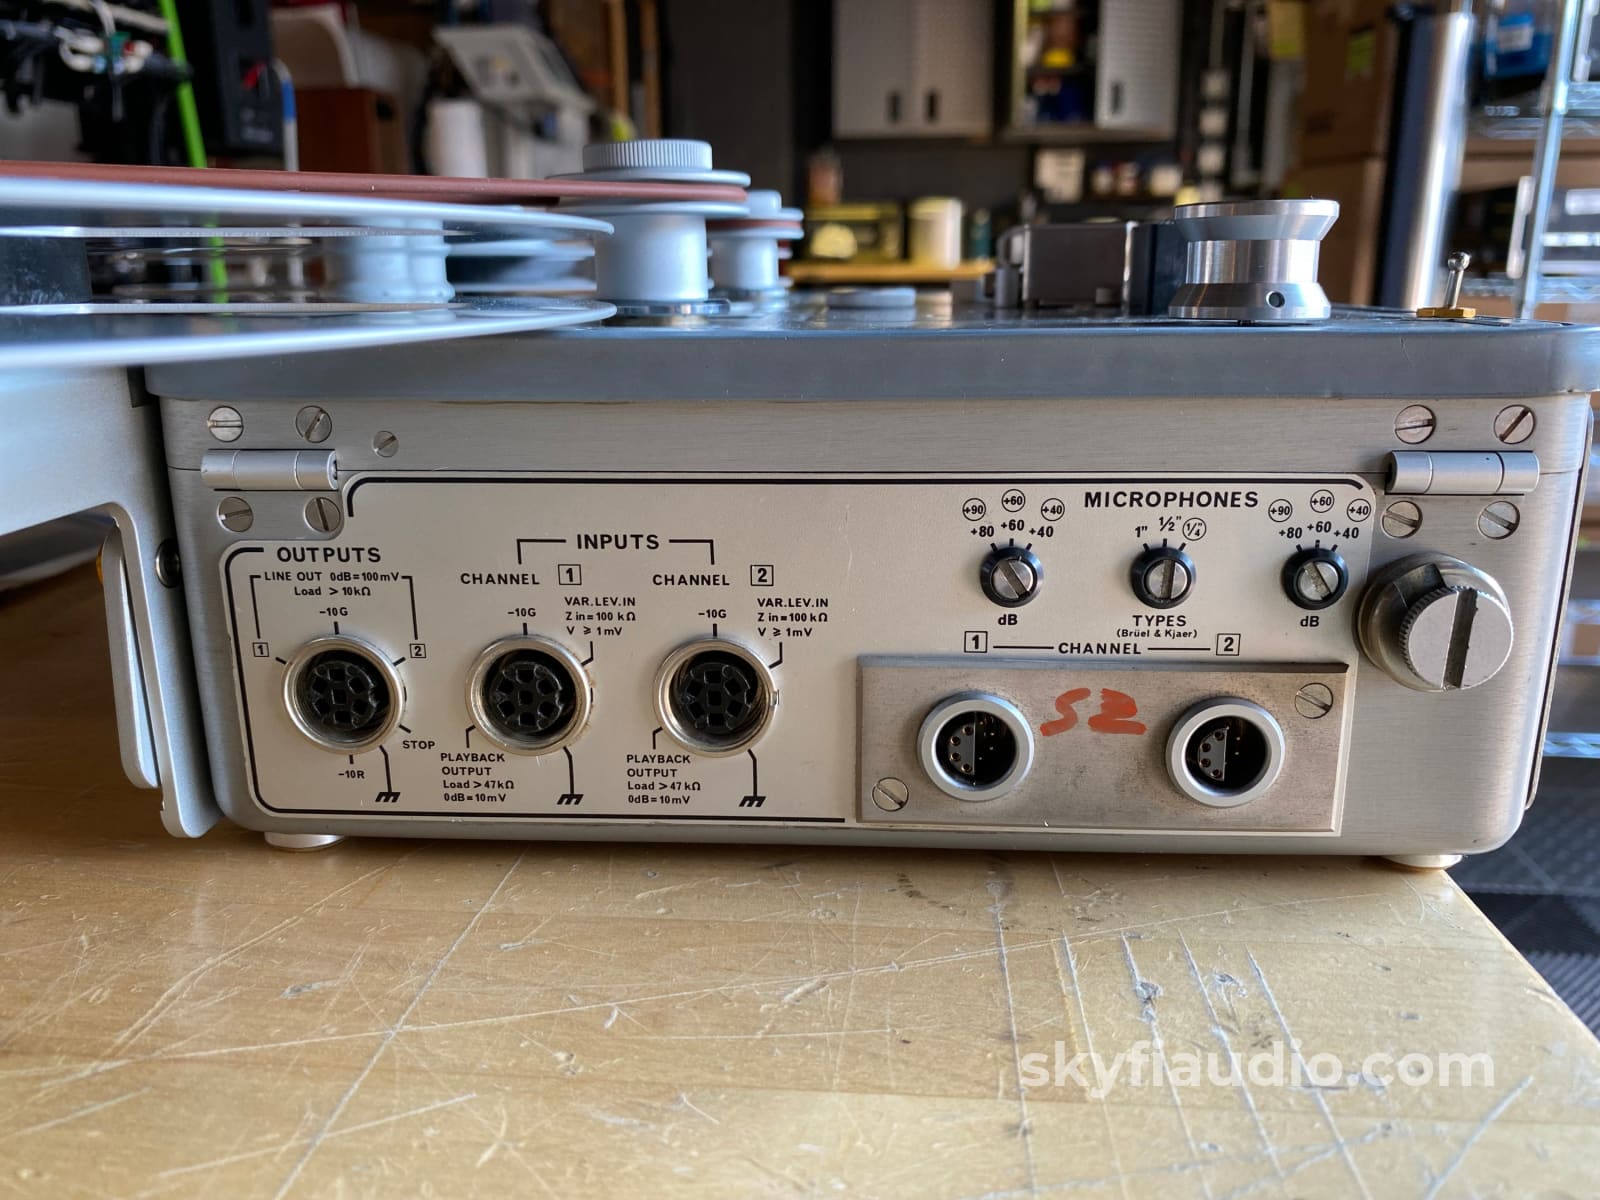 Nagra Iv-Sj Reel To With Accessories And 10 Adapters Recyzufxduel84Cse